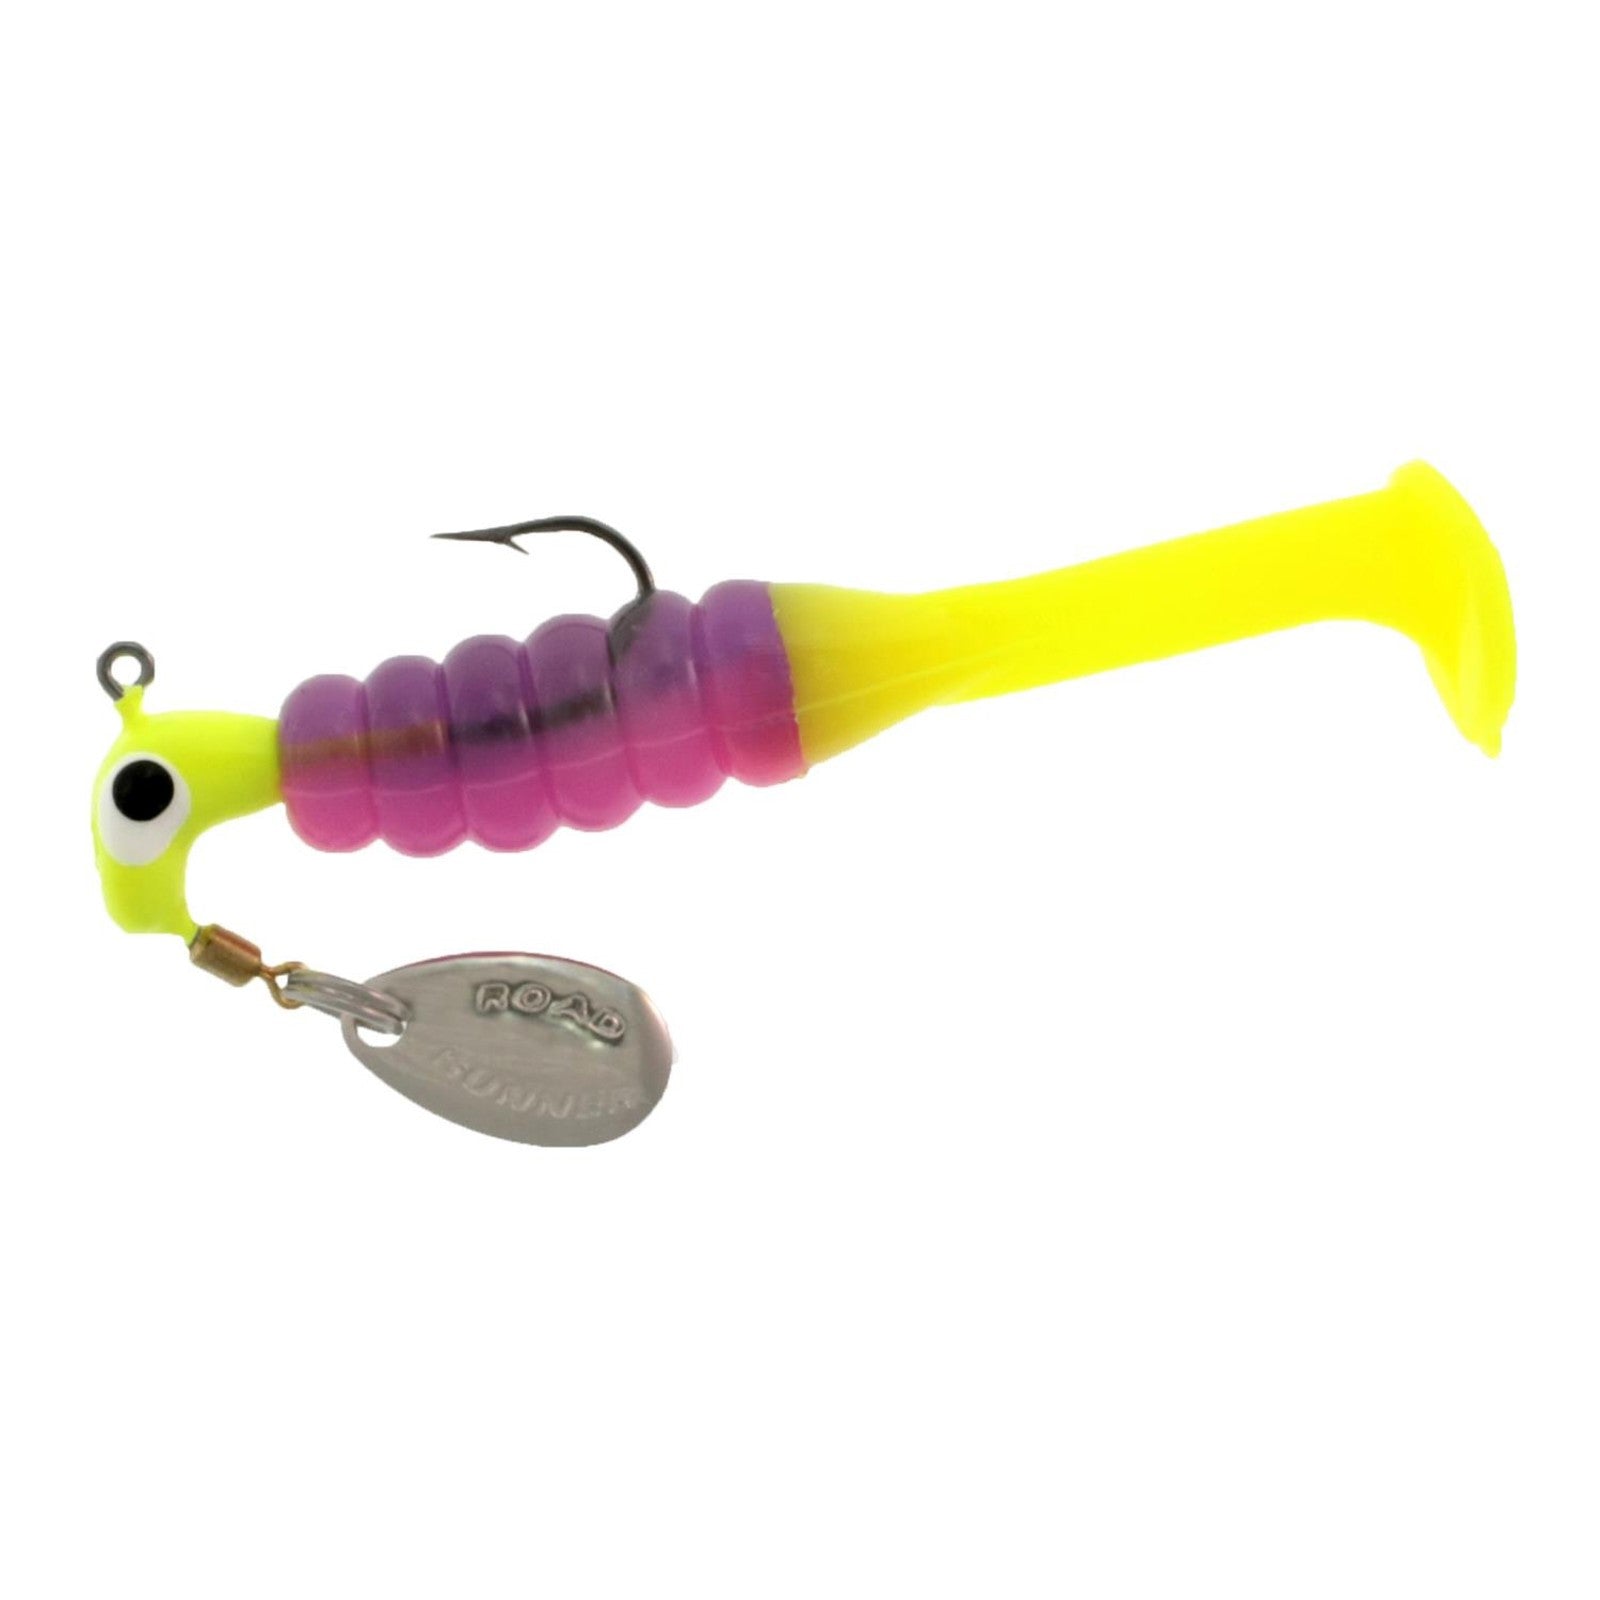 Mr. Crappie Slabalicious Road Runner Chartreuse/Popsicle; 1/16 oz.